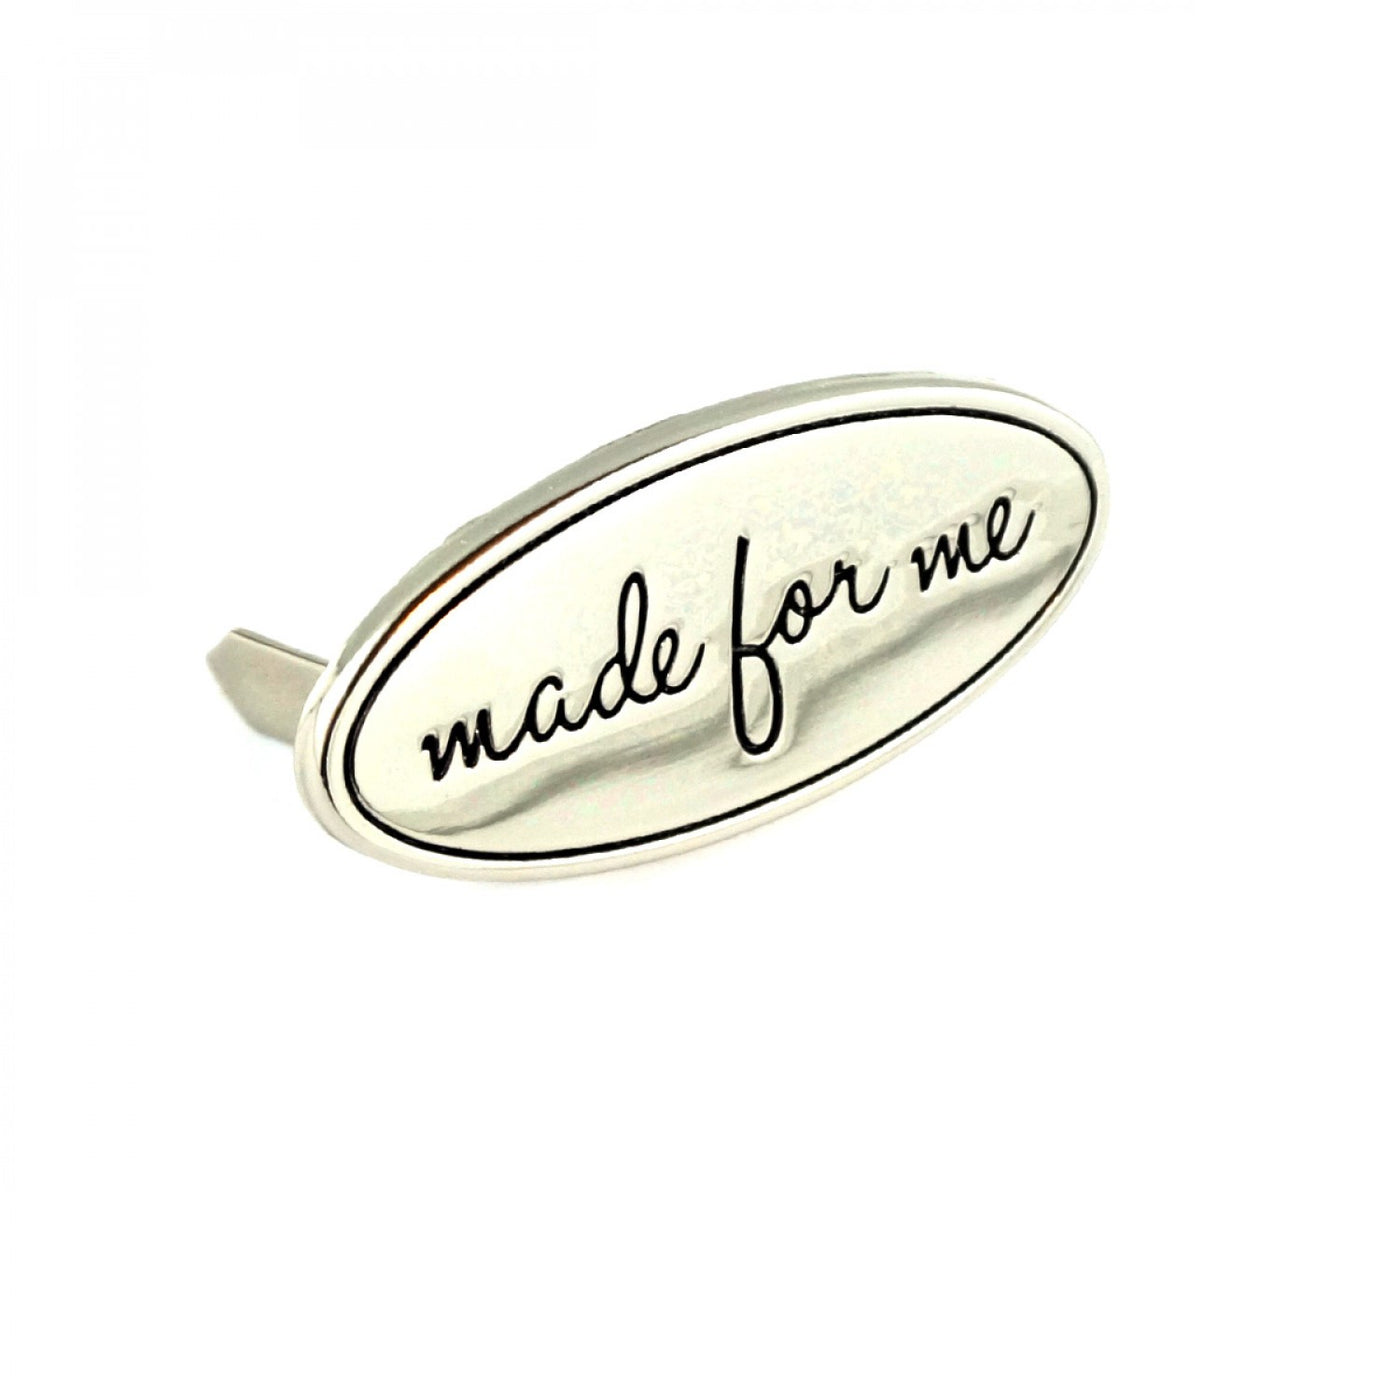 "made for me" Metal Handmade Label